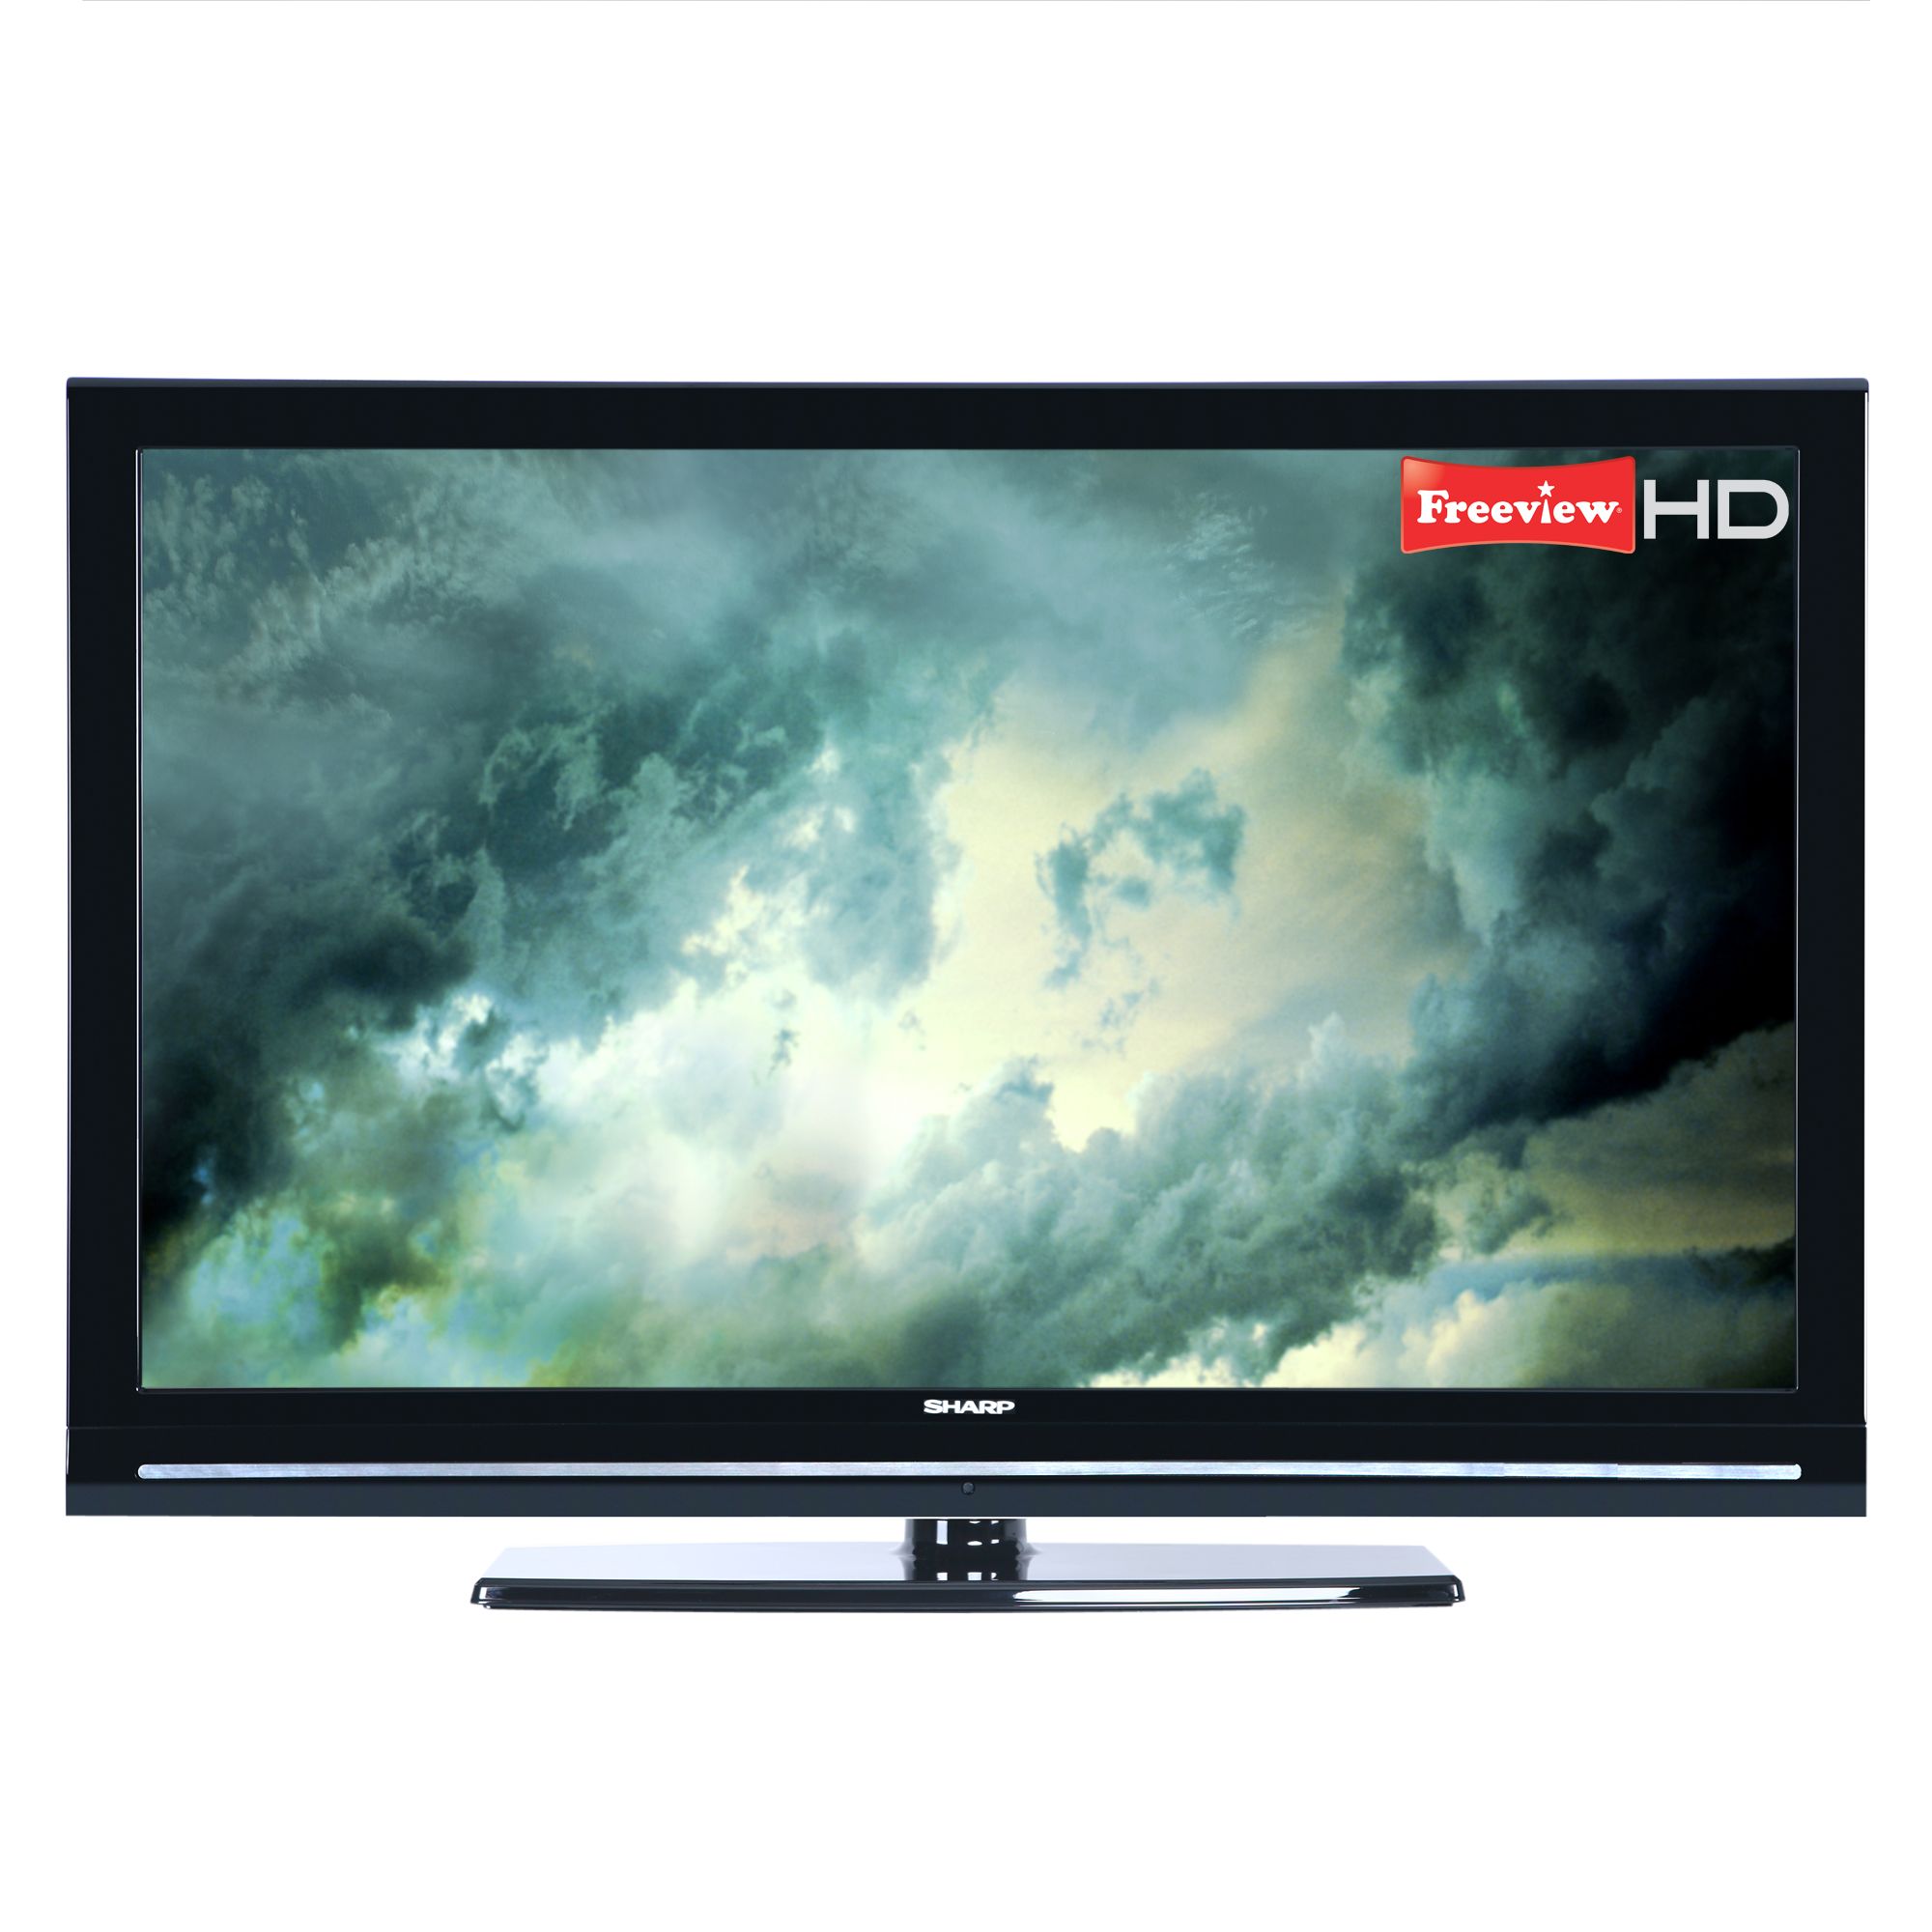 Sharp LC32CT2 LCD HD 1080p Digital Television, 32 Inch with Built-in Freeview HD at John Lewis